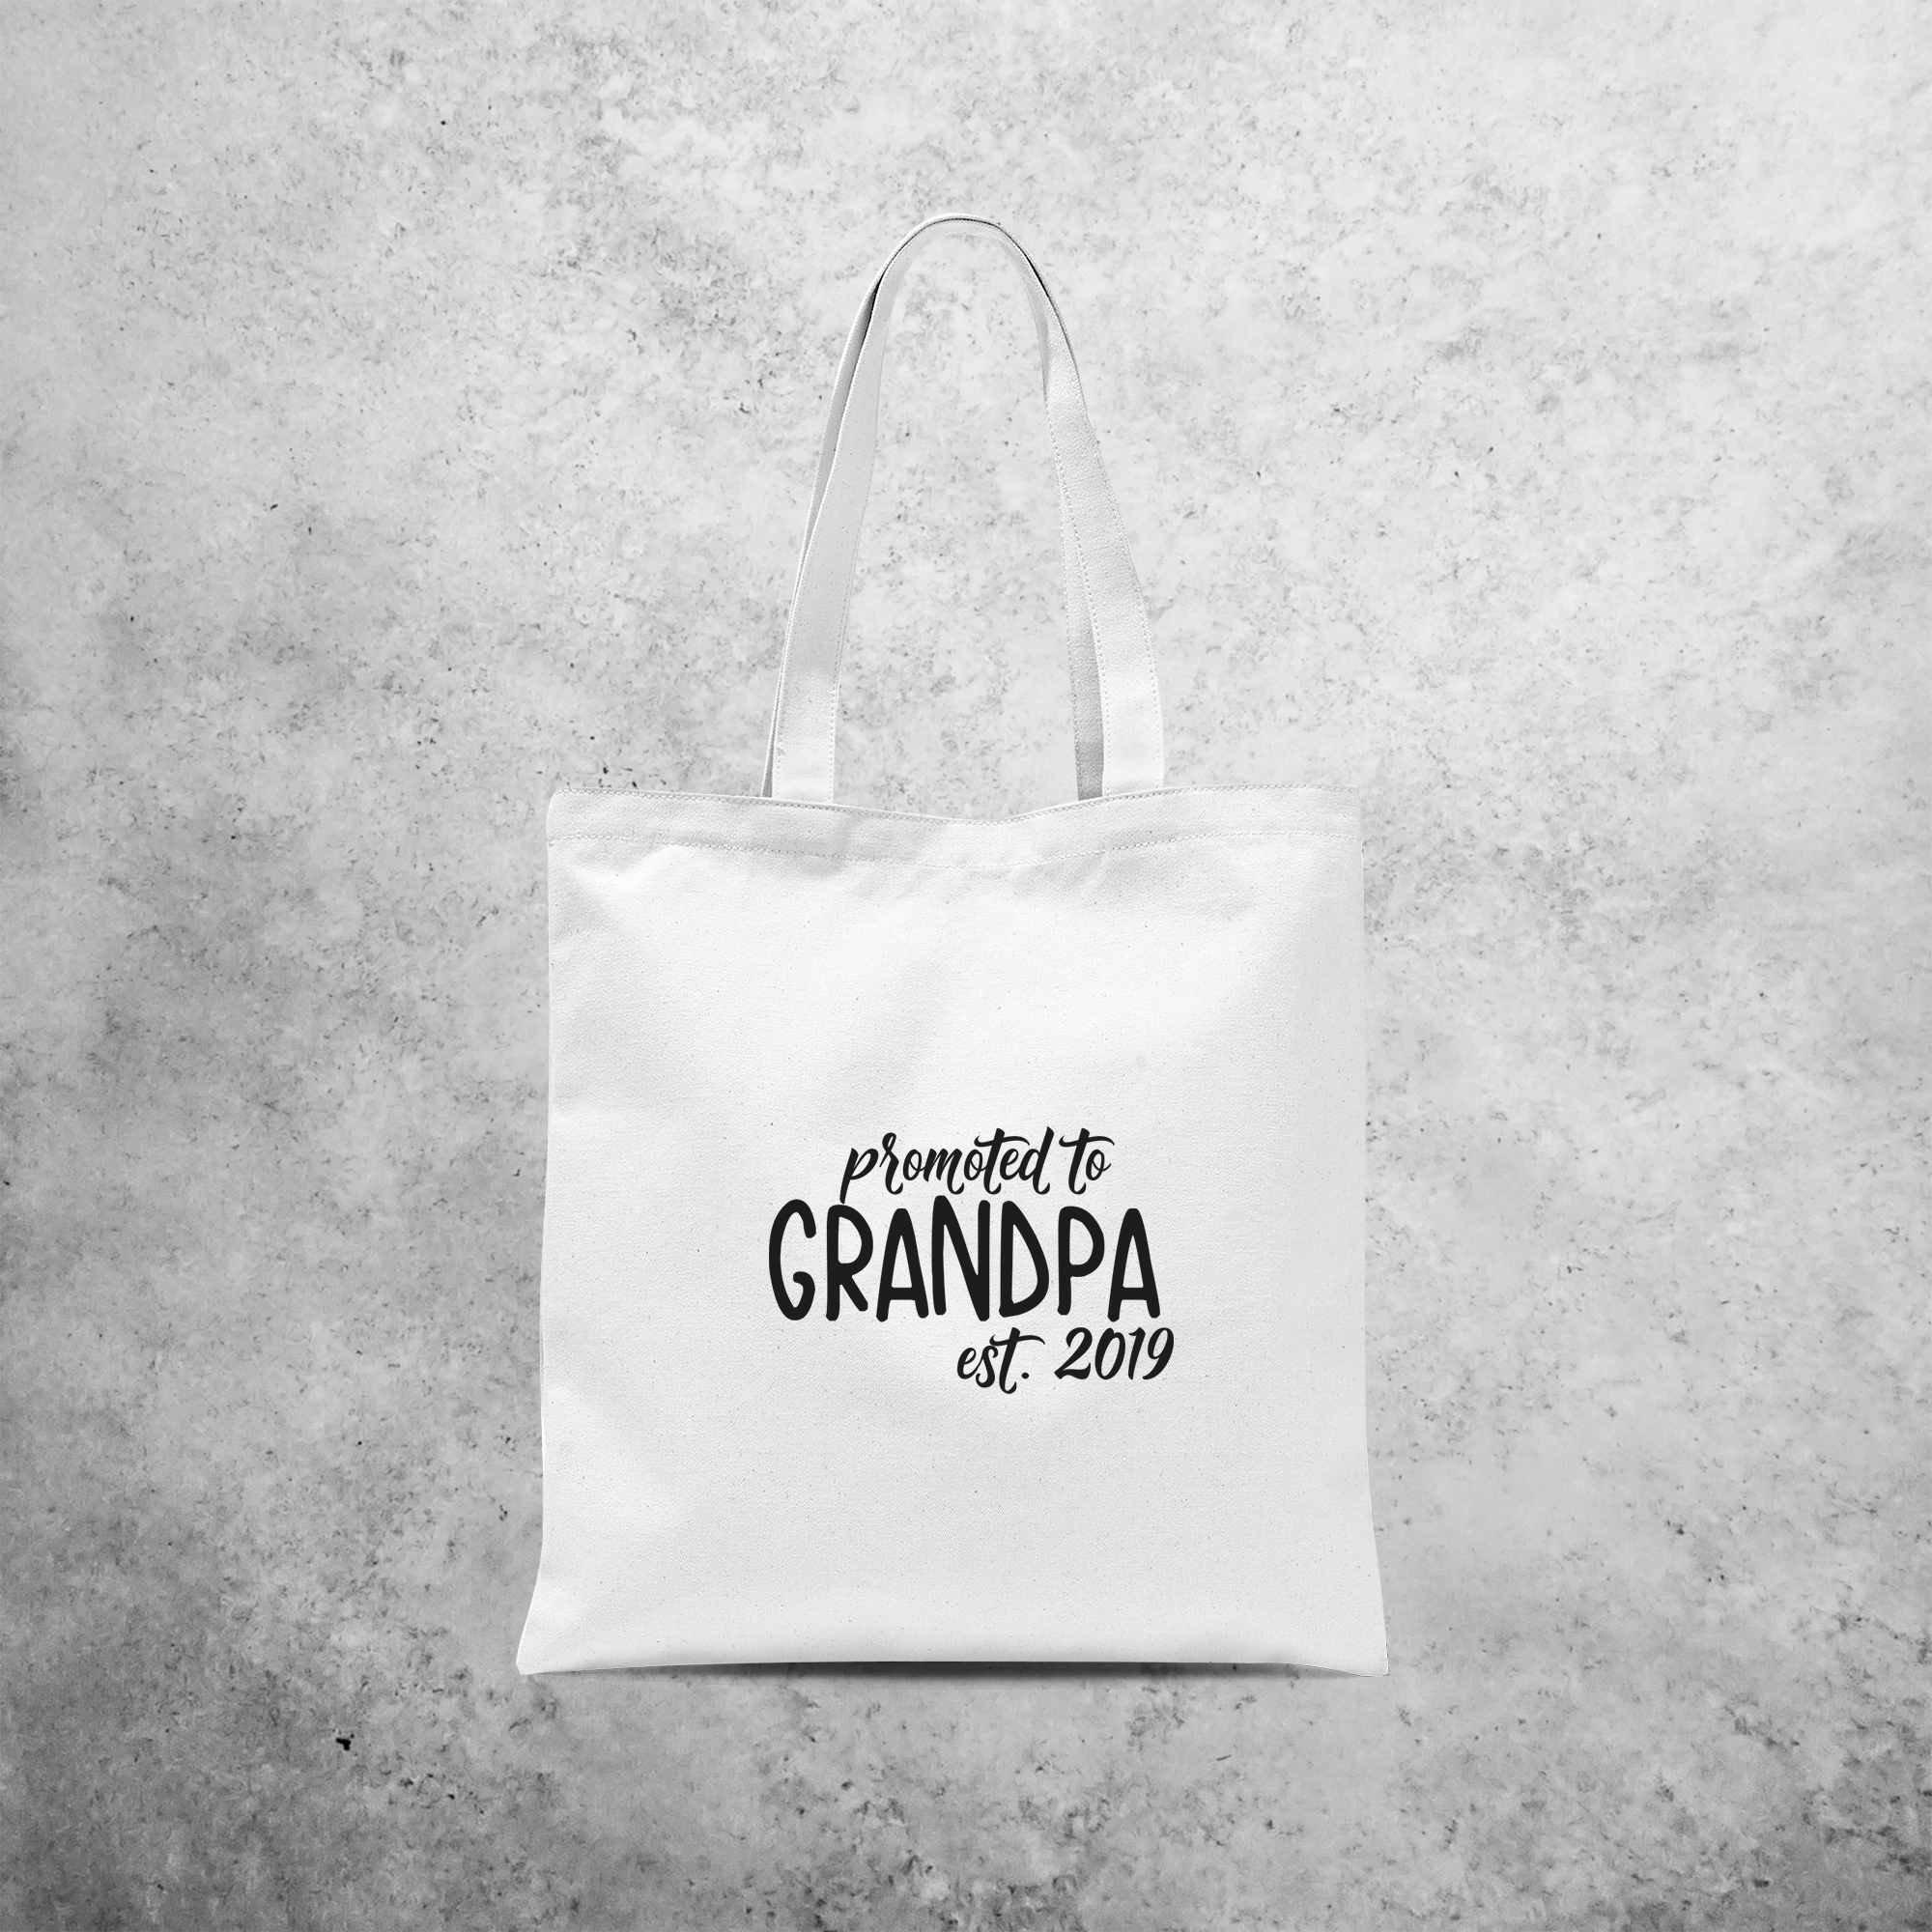 'Promoted to grandpa' tote bag